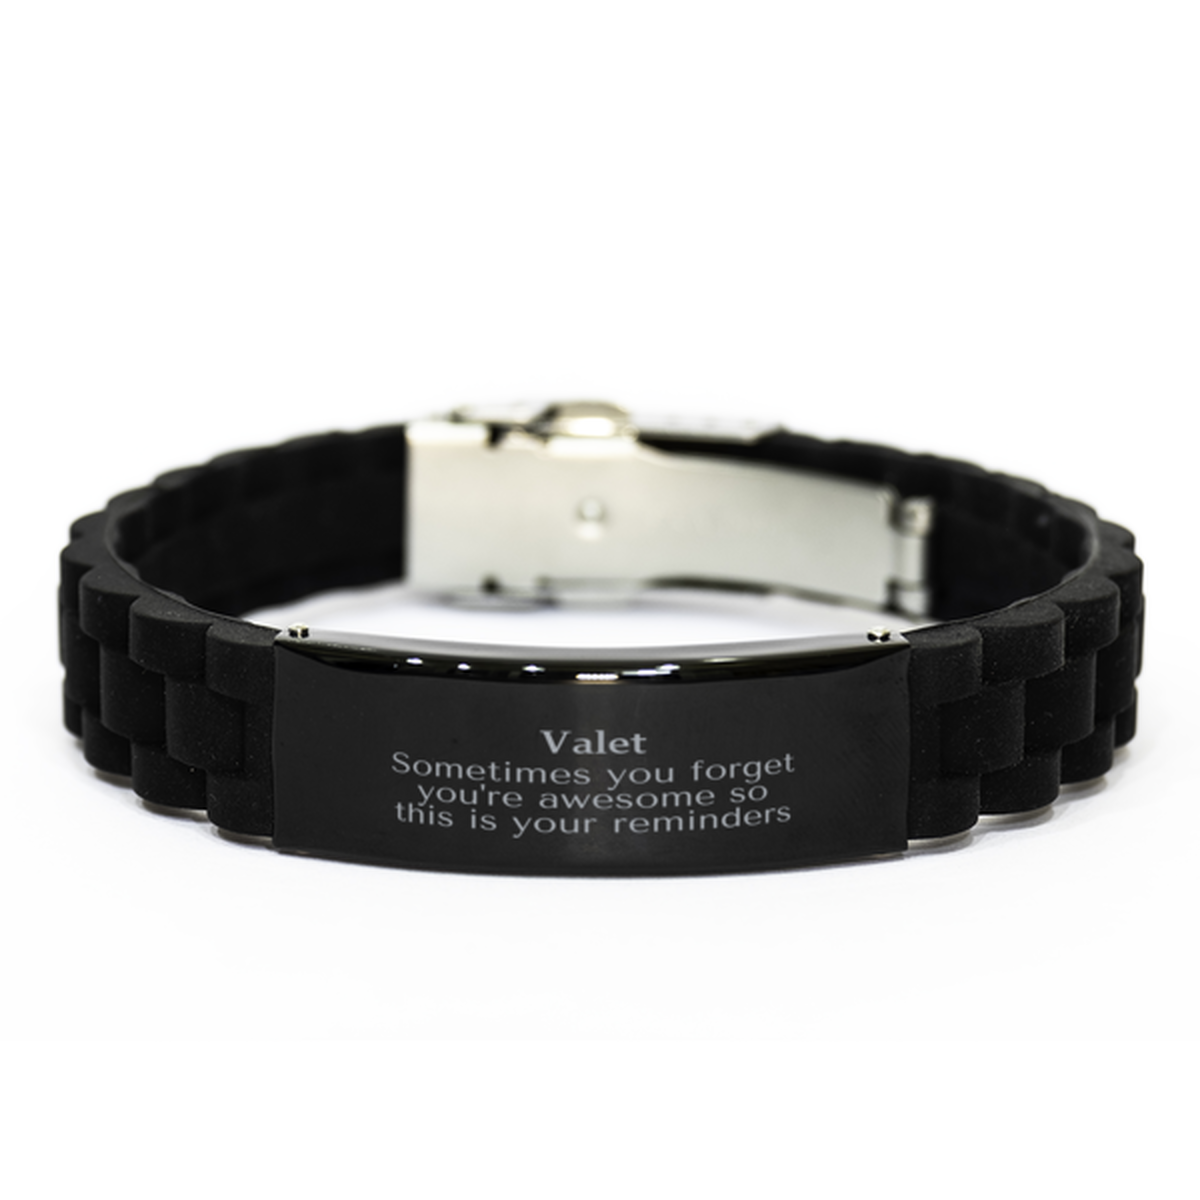 Sentimental Valet Black Glidelock Clasp Bracelet, Valet Sometimes you forget you're awesome so this is your reminders, Graduation Christmas Birthday Gifts for Valet, Men, Women, Coworkers